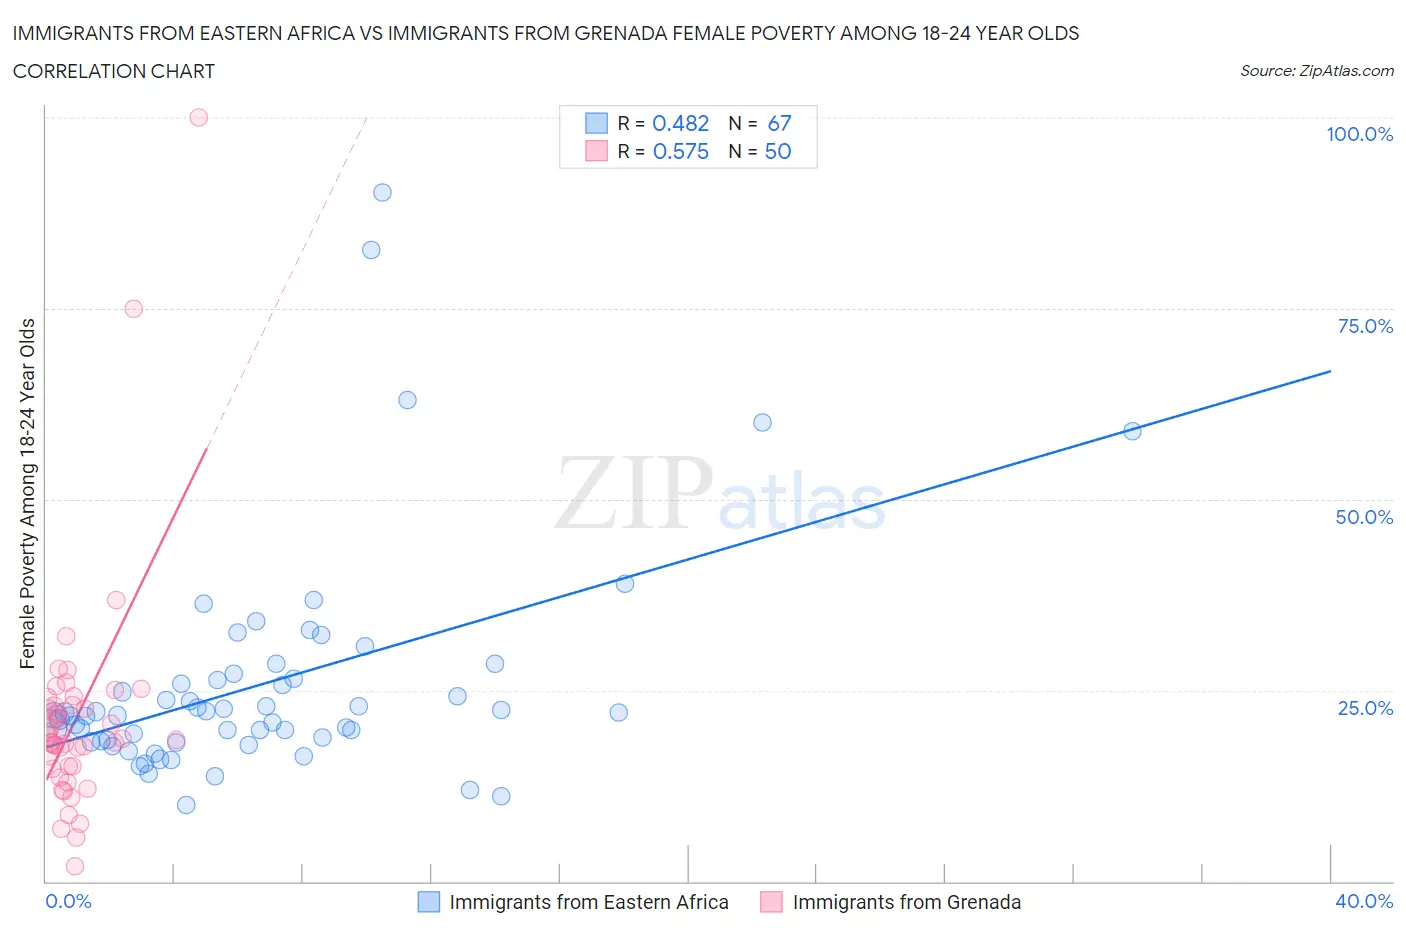 Immigrants from Eastern Africa vs Immigrants from Grenada Female Poverty Among 18-24 Year Olds